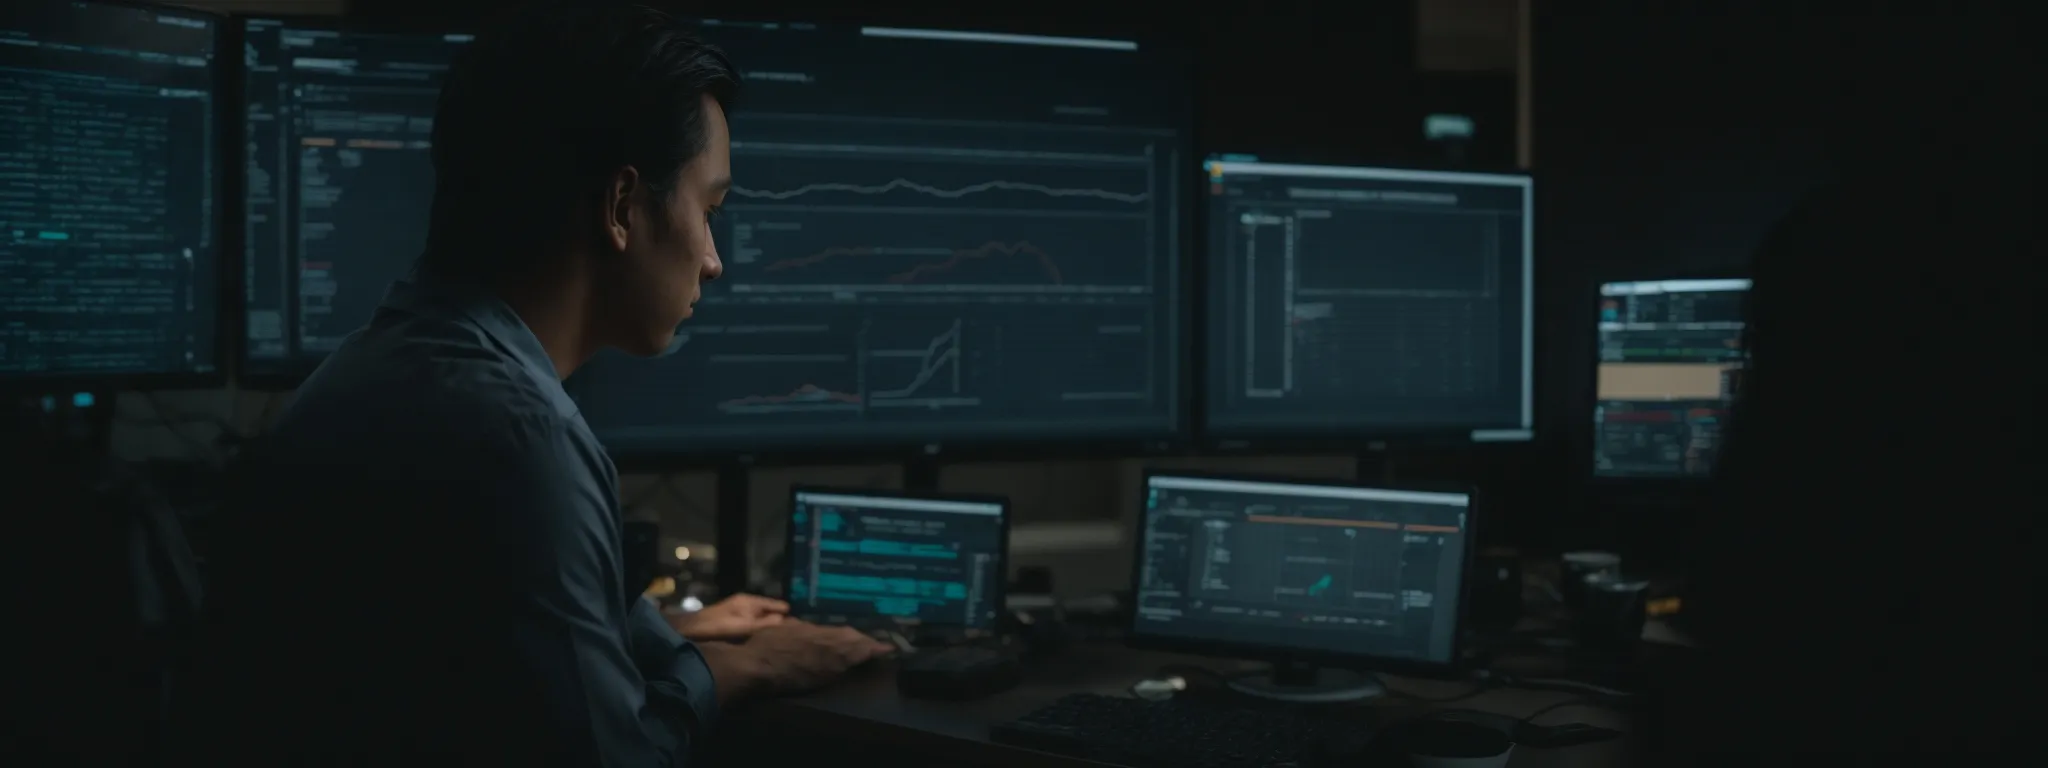 a writer is gazing thoughtfully at a large computer screen displaying drafts and analytics while artificial intelligence software interface elements slightly blur in the background.